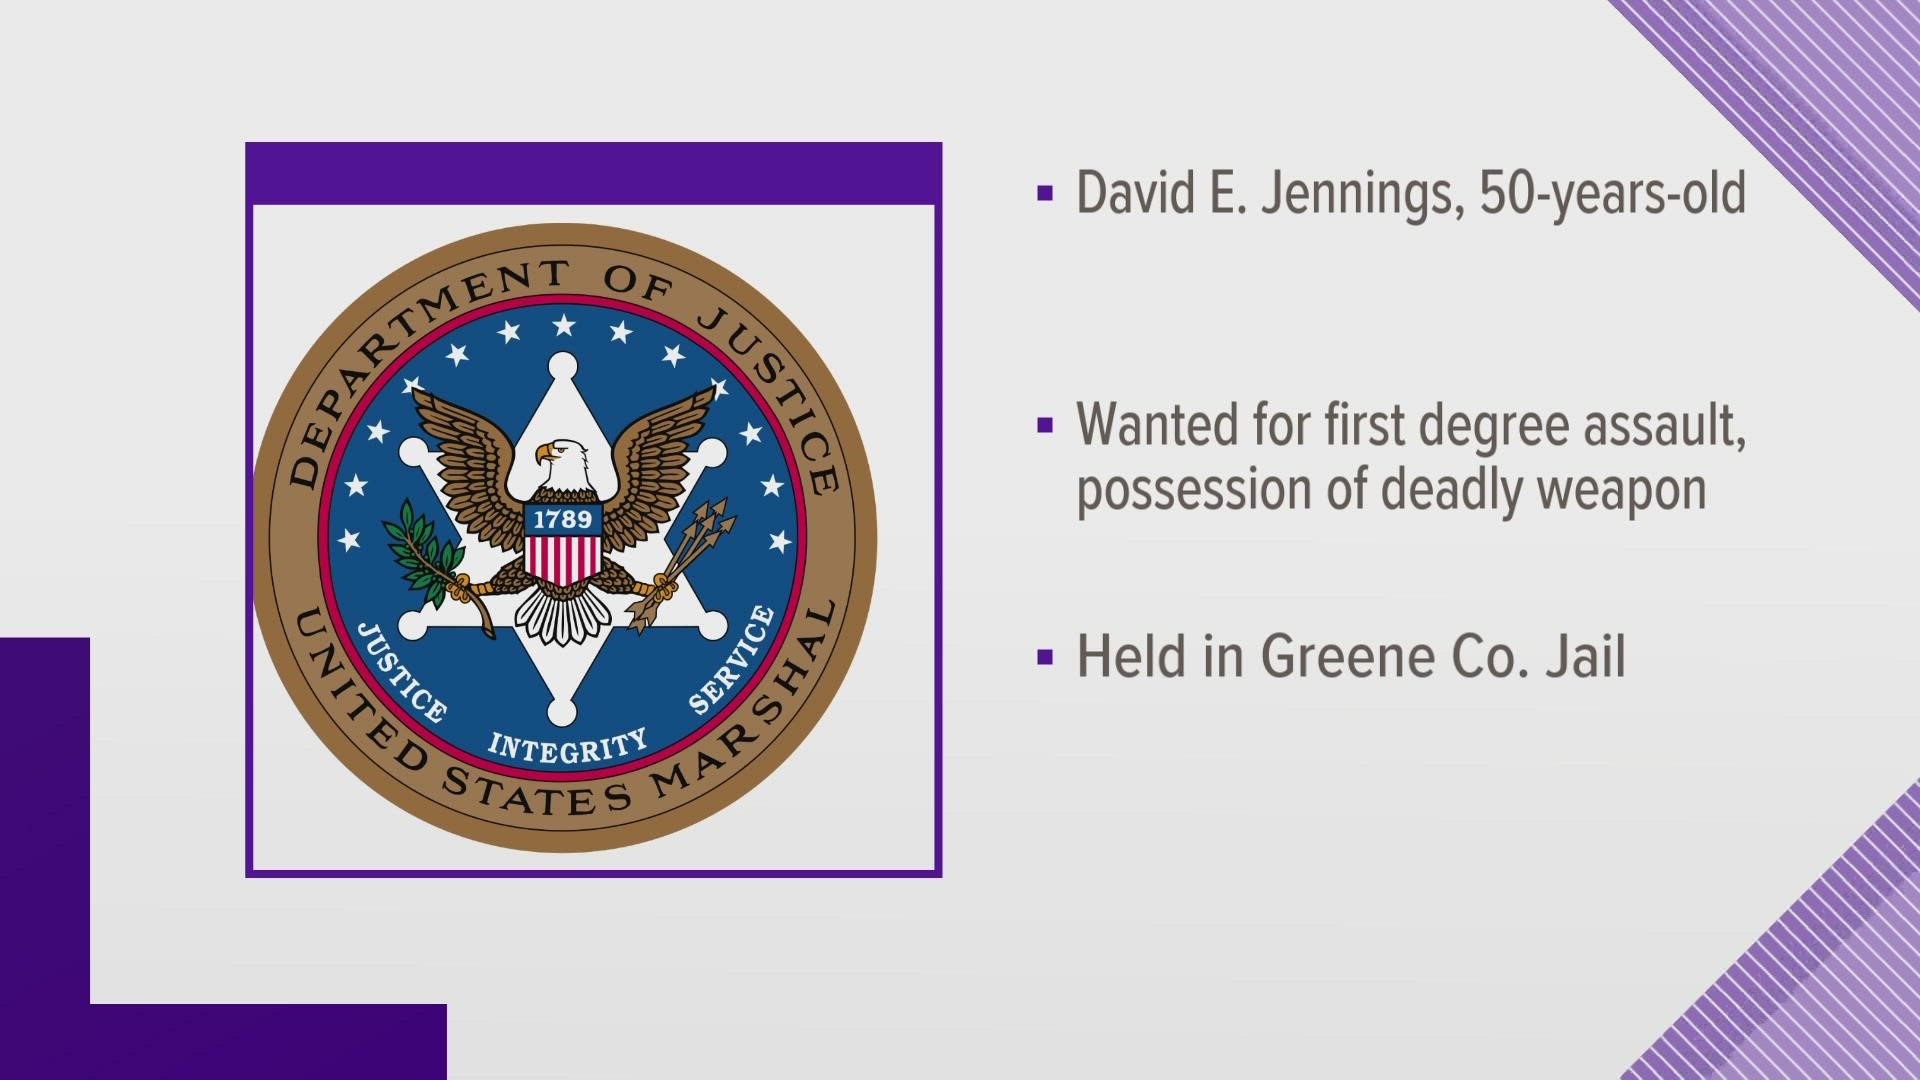 The US Marshals Service said David E. Jennings was wanted in Delaware for first-degree assault and possession of a deadly weapon.